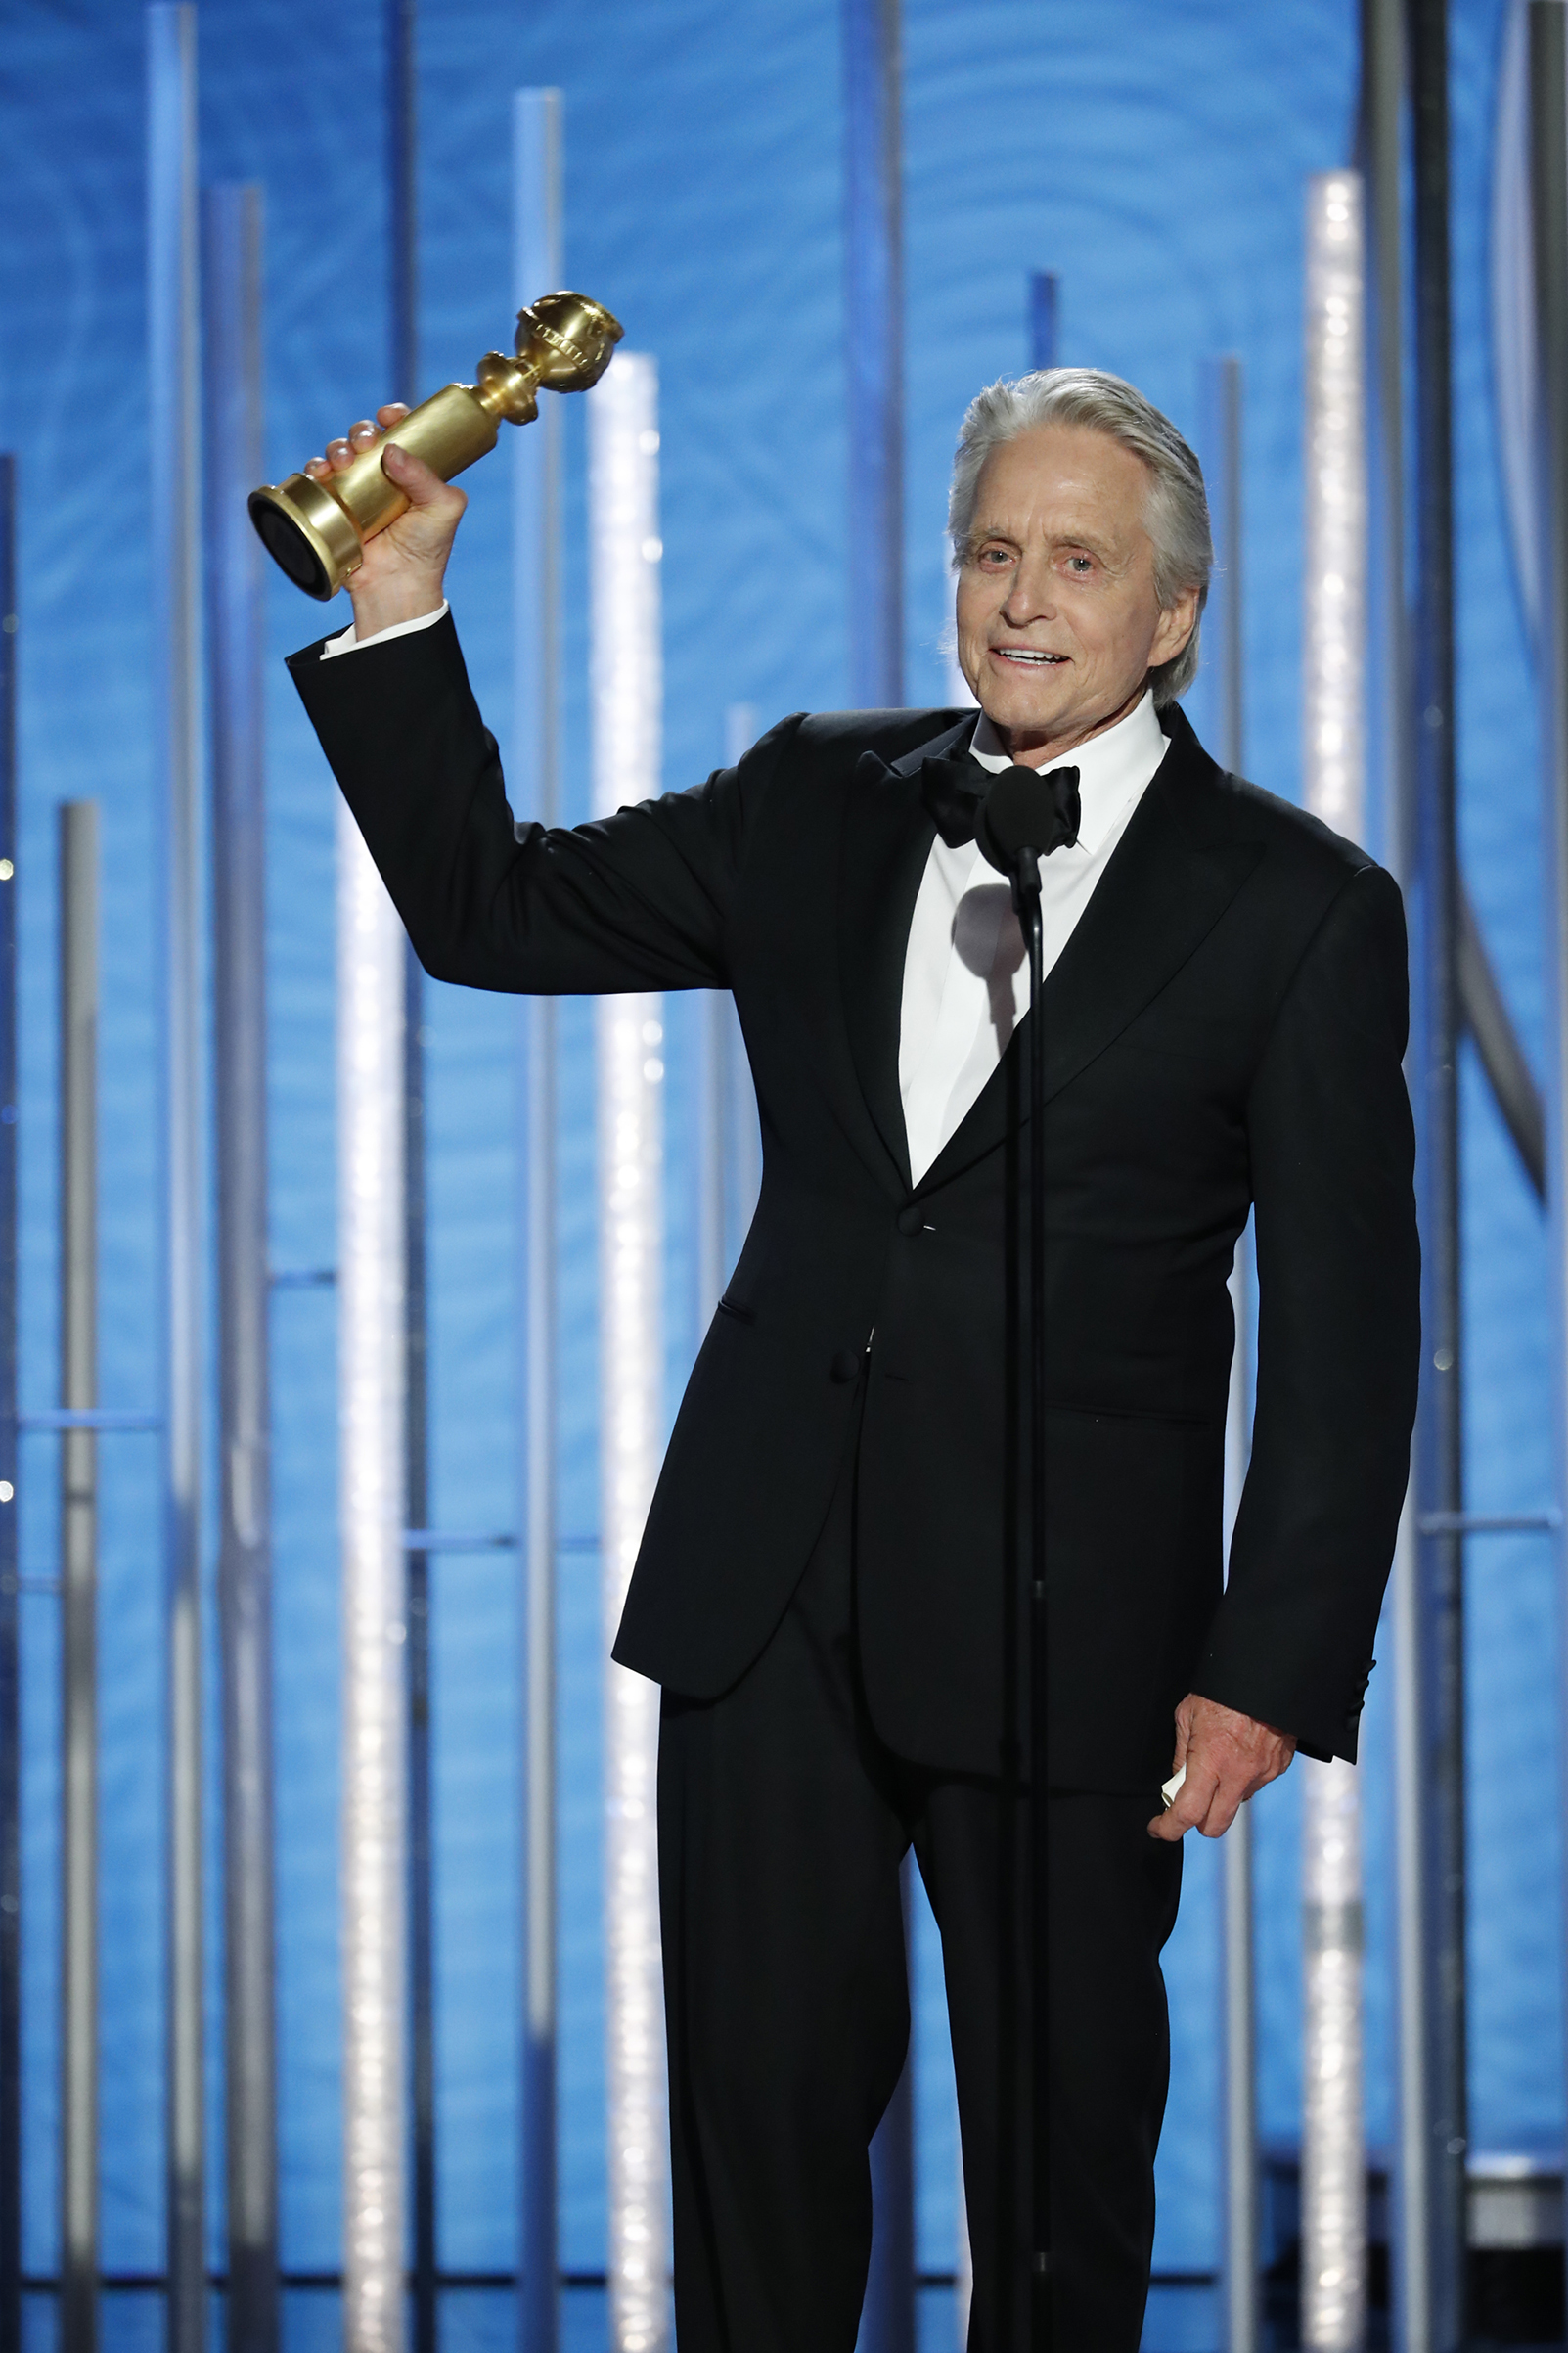 Michael Douglas from the “The Kominsky Method” accepts the Best Performance by an Actor in a Television Series – Musical or Comedy award onstage during the 76th Annual Golden Globe Awards. (NBCUniversal/Getty Images)